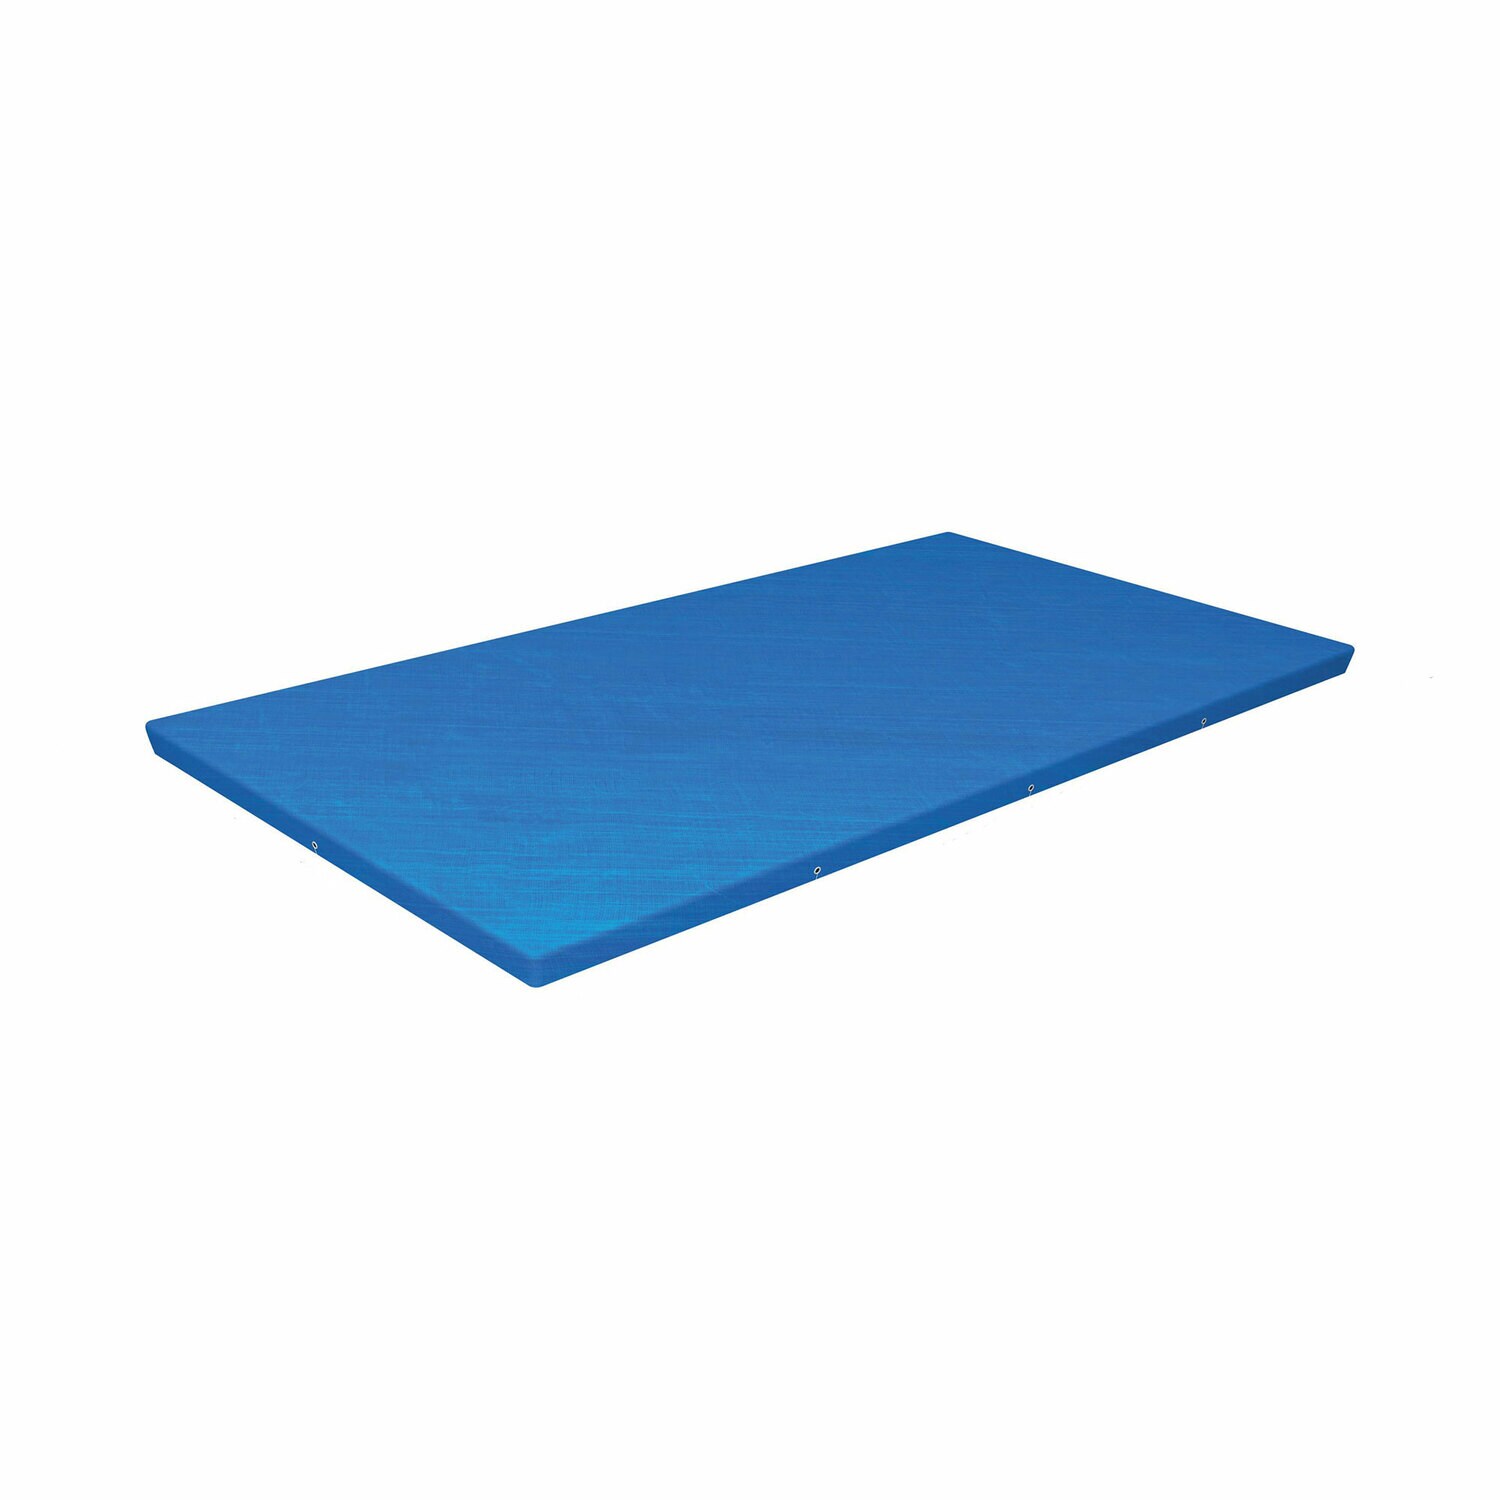 Pool Cover 6 Pads